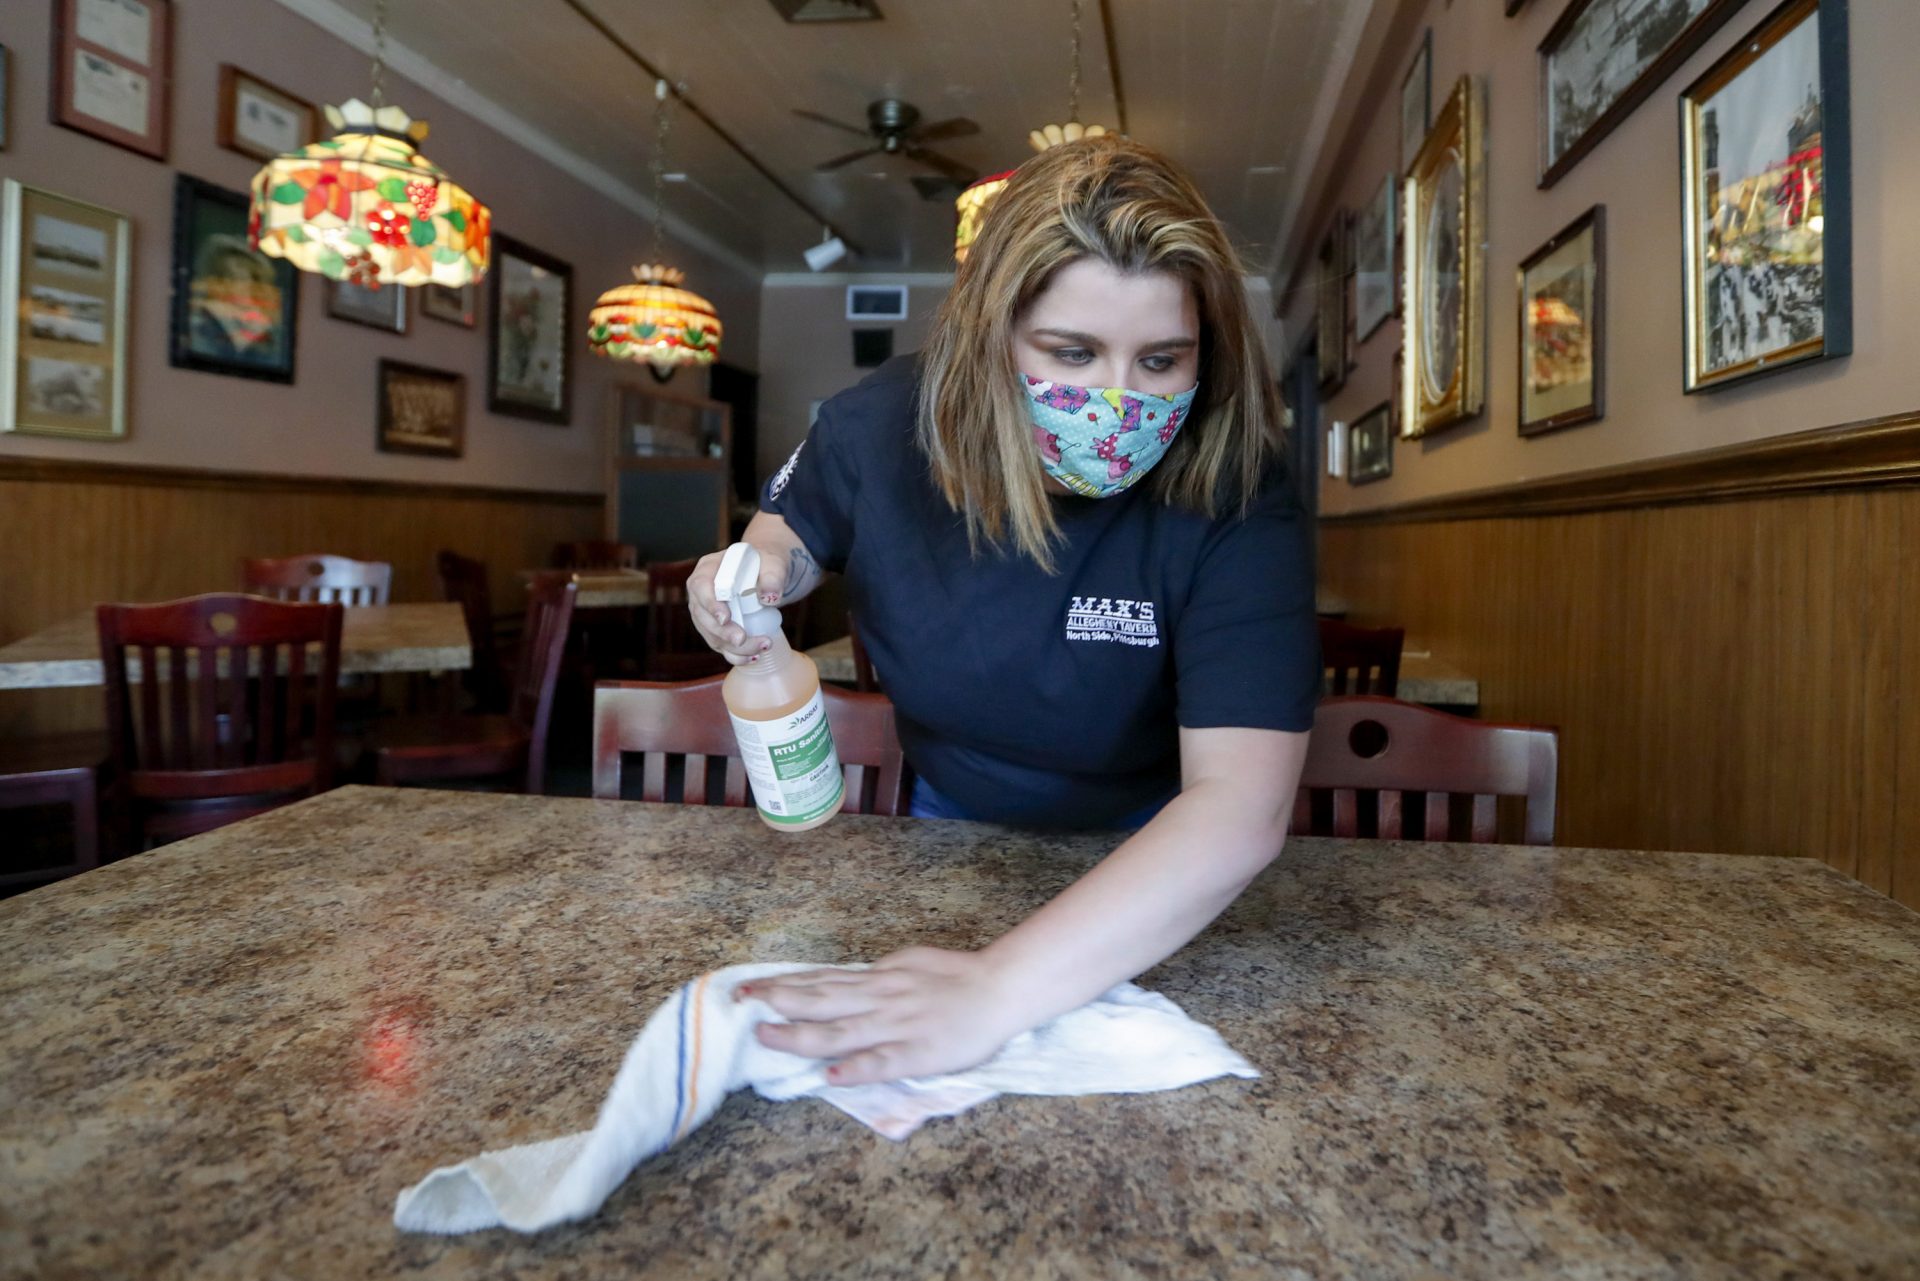 Sara Kennely, cleans one of the dining tables at Max's Allegheny Tavern, Thursday, June 4, 2020. The restaurant taped over the surfaces of some tables to restrict seating to maintain social distancing when patrons are permitted to dine inside when most of southwest Pennsylvania loosens COVID-19 restrictions on Friday.